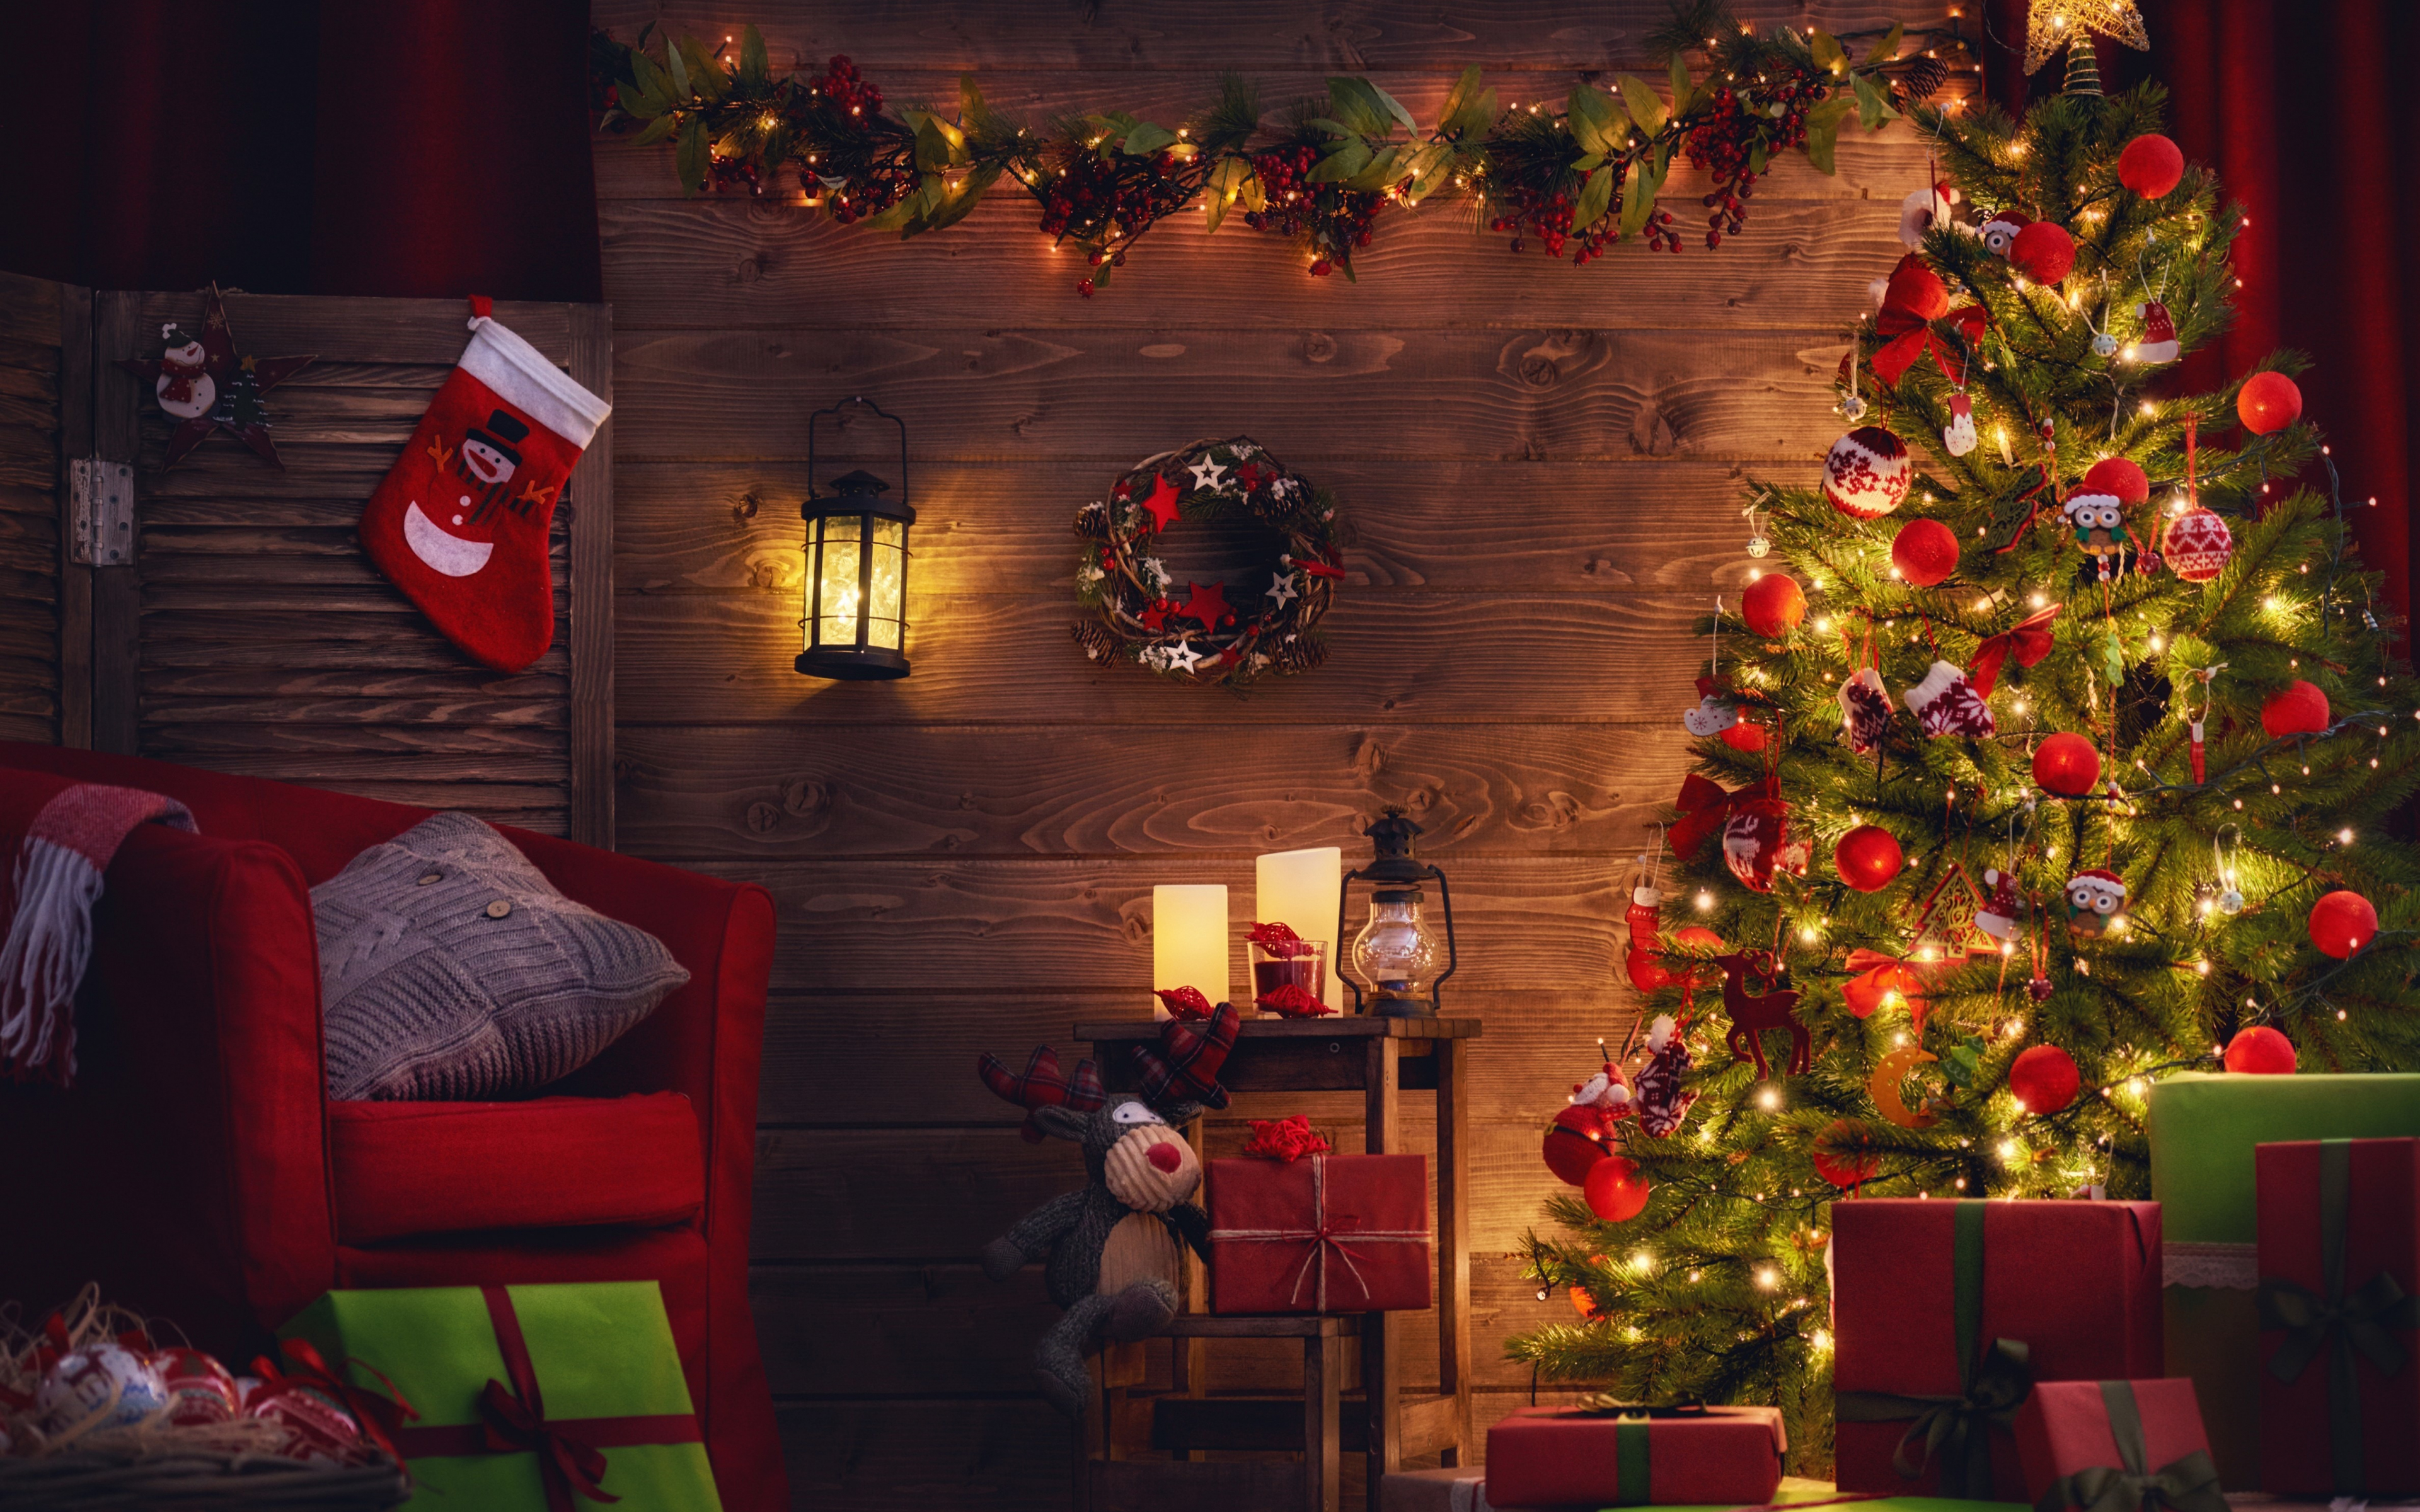 Christmas 4k uhd 16:9 wallpapers hd, desktop backgrounds 3840x2160, images  and pictures